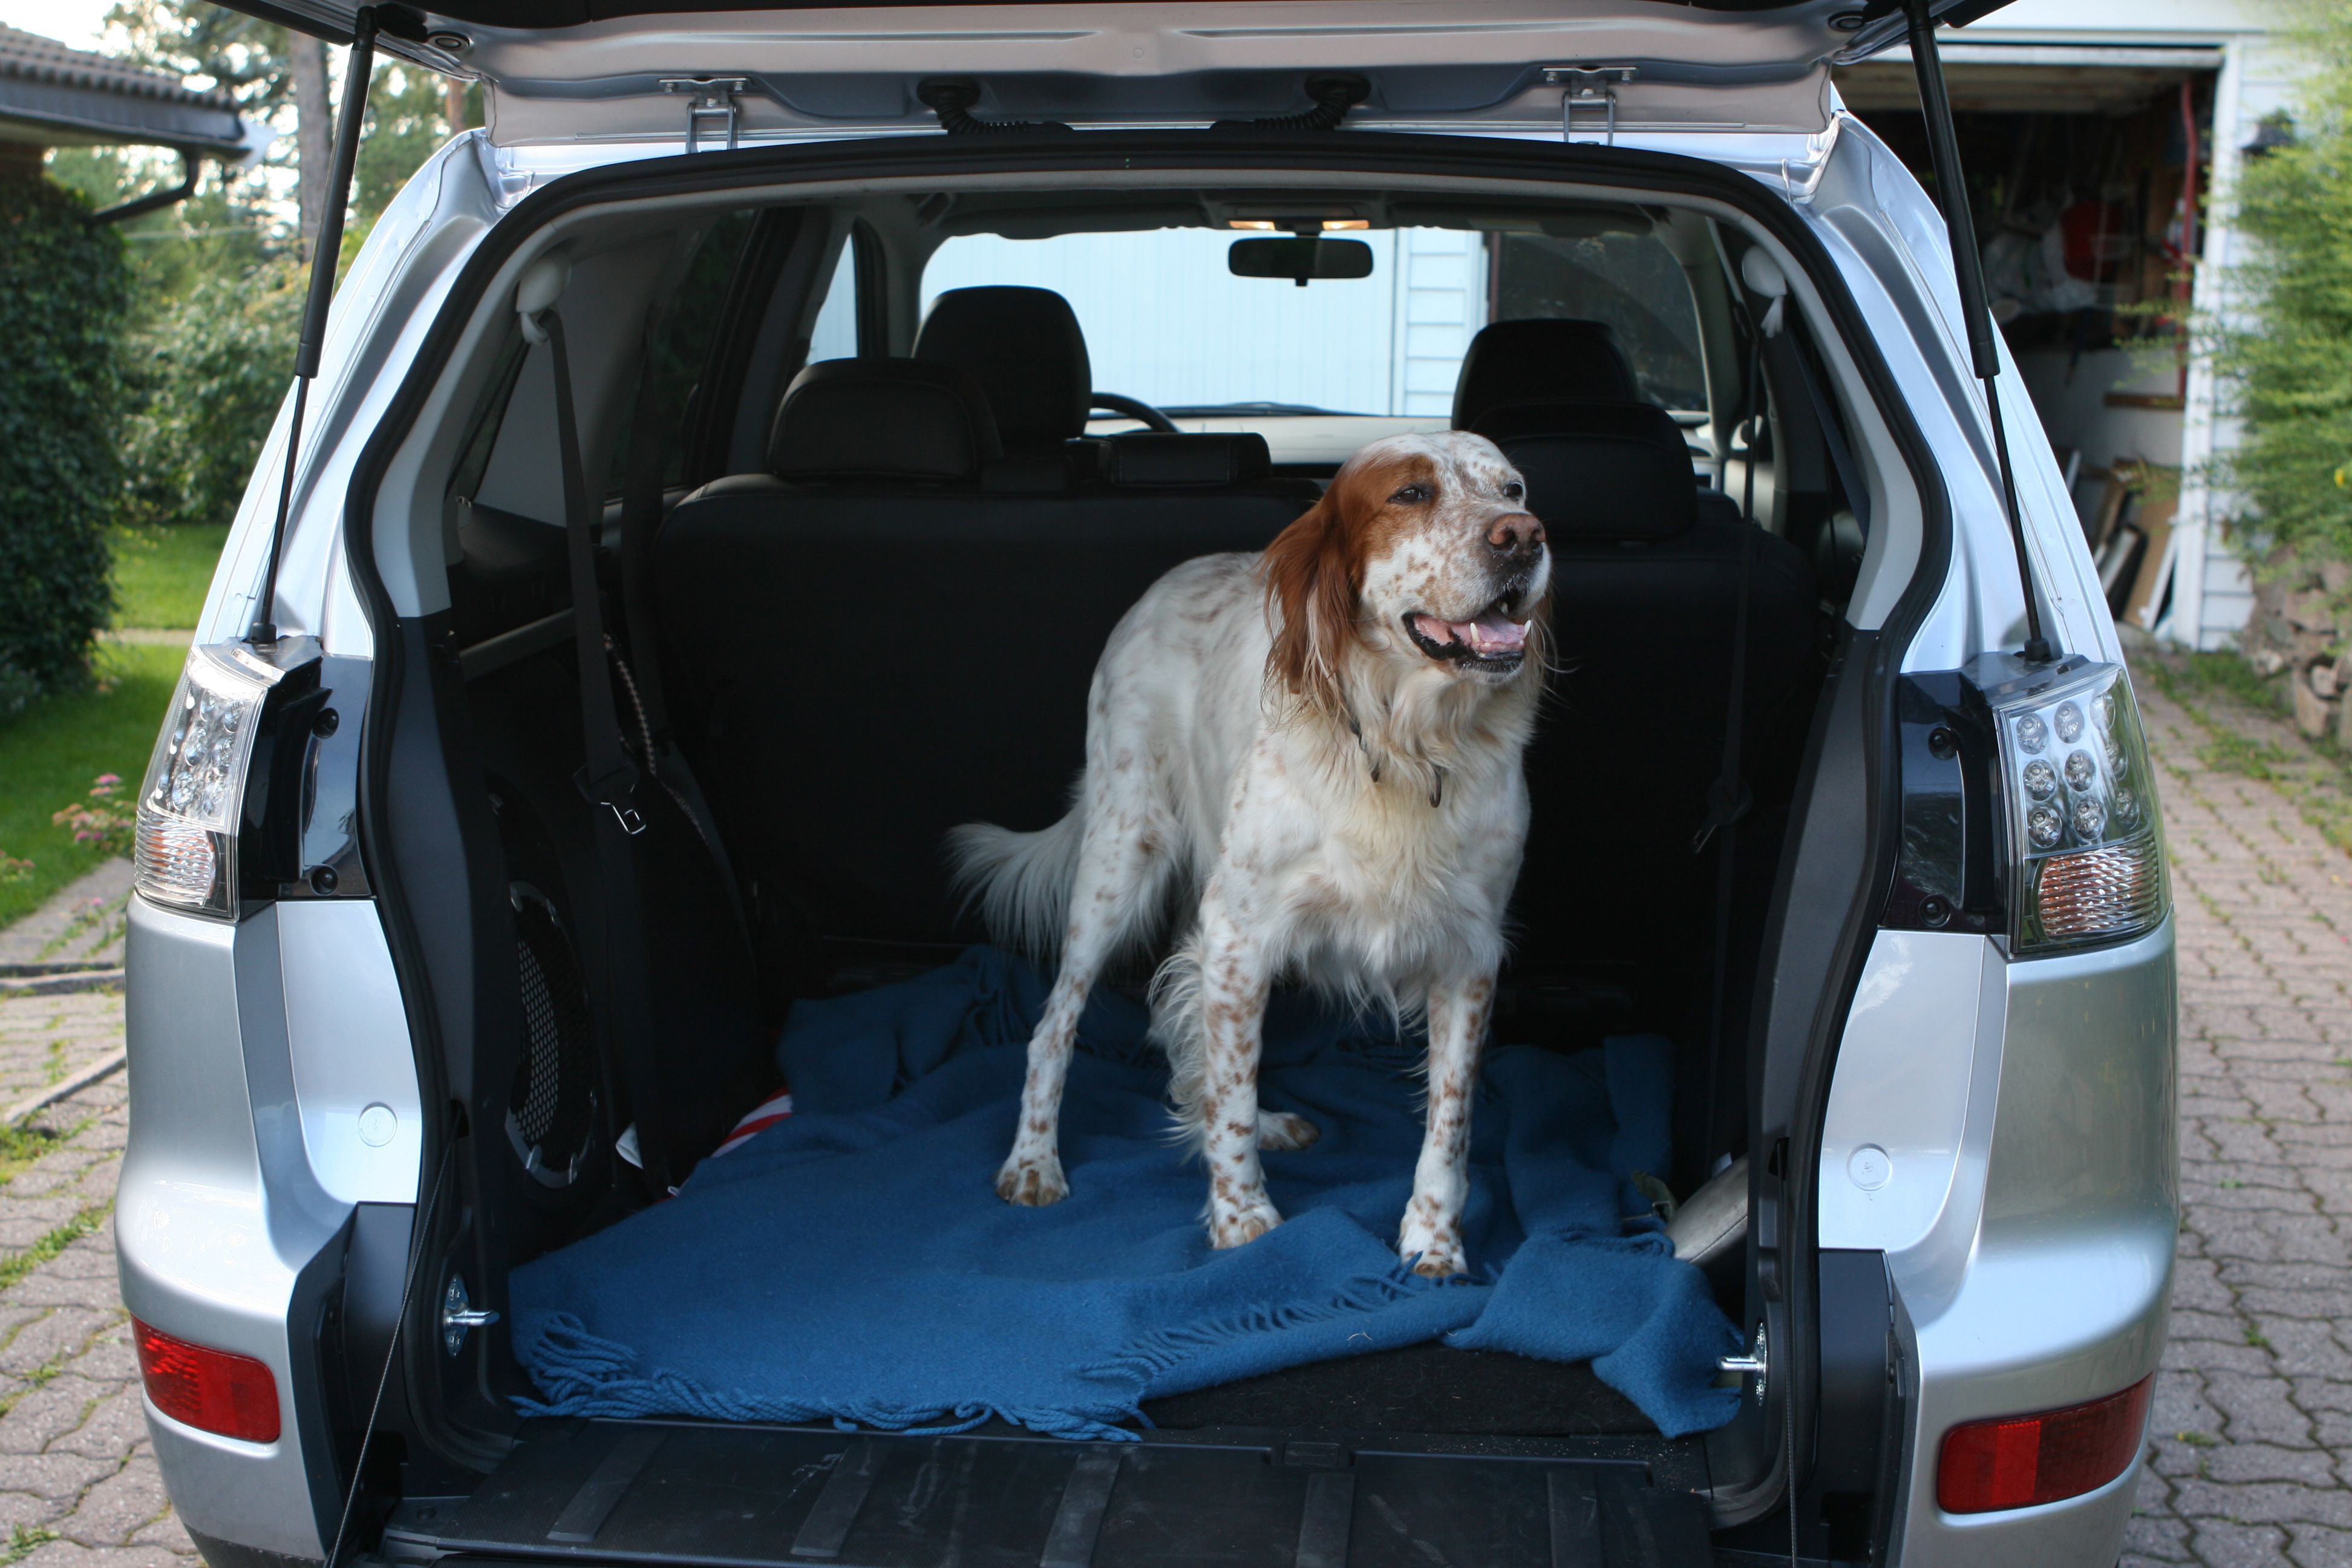 Dog standing in the trunk of a vehicle with a blue blanket.